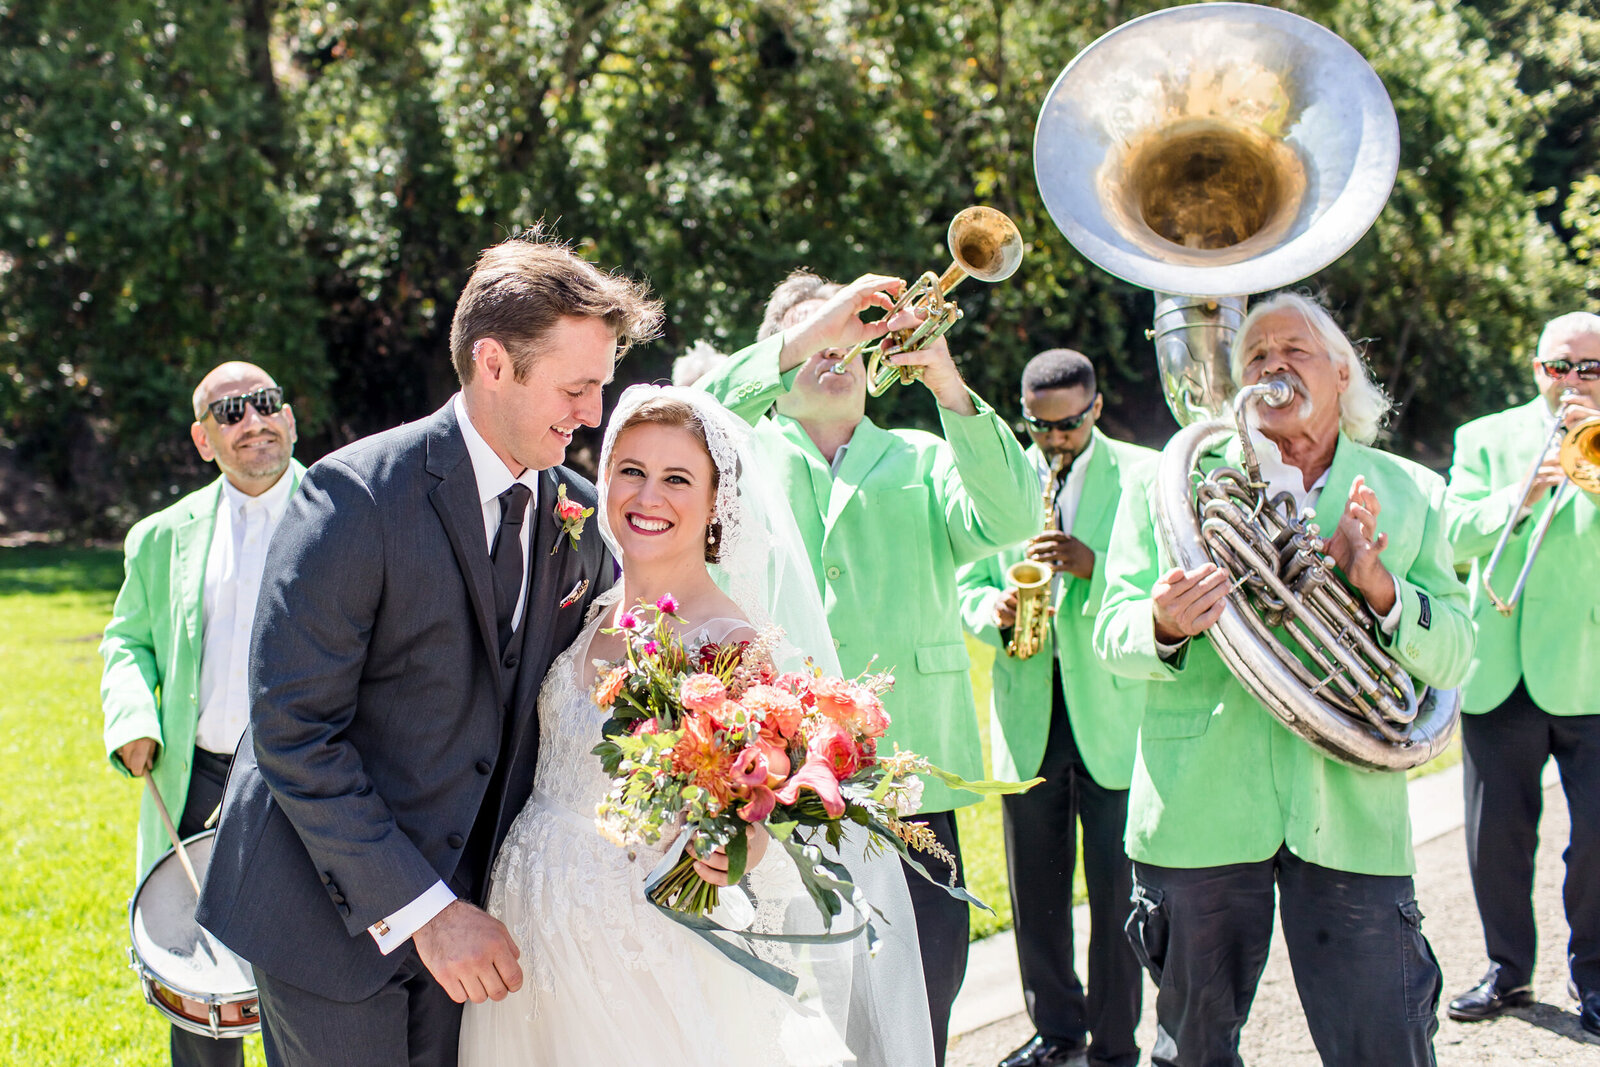 fun wedding photography with full brass band